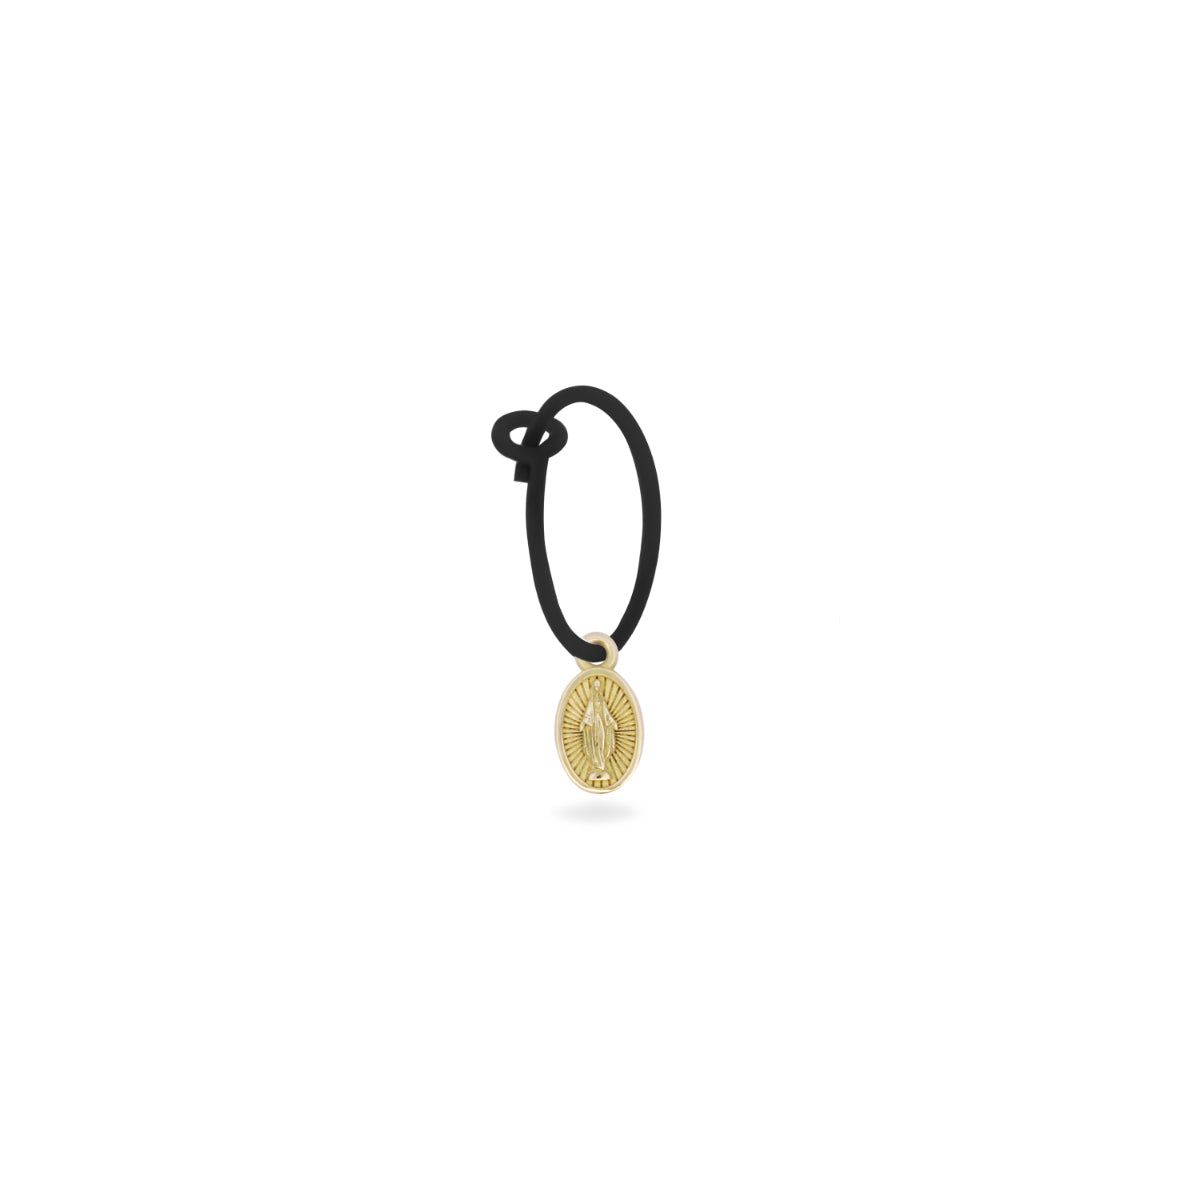 Single earring with Madonna and painted hoop - ORO18KT